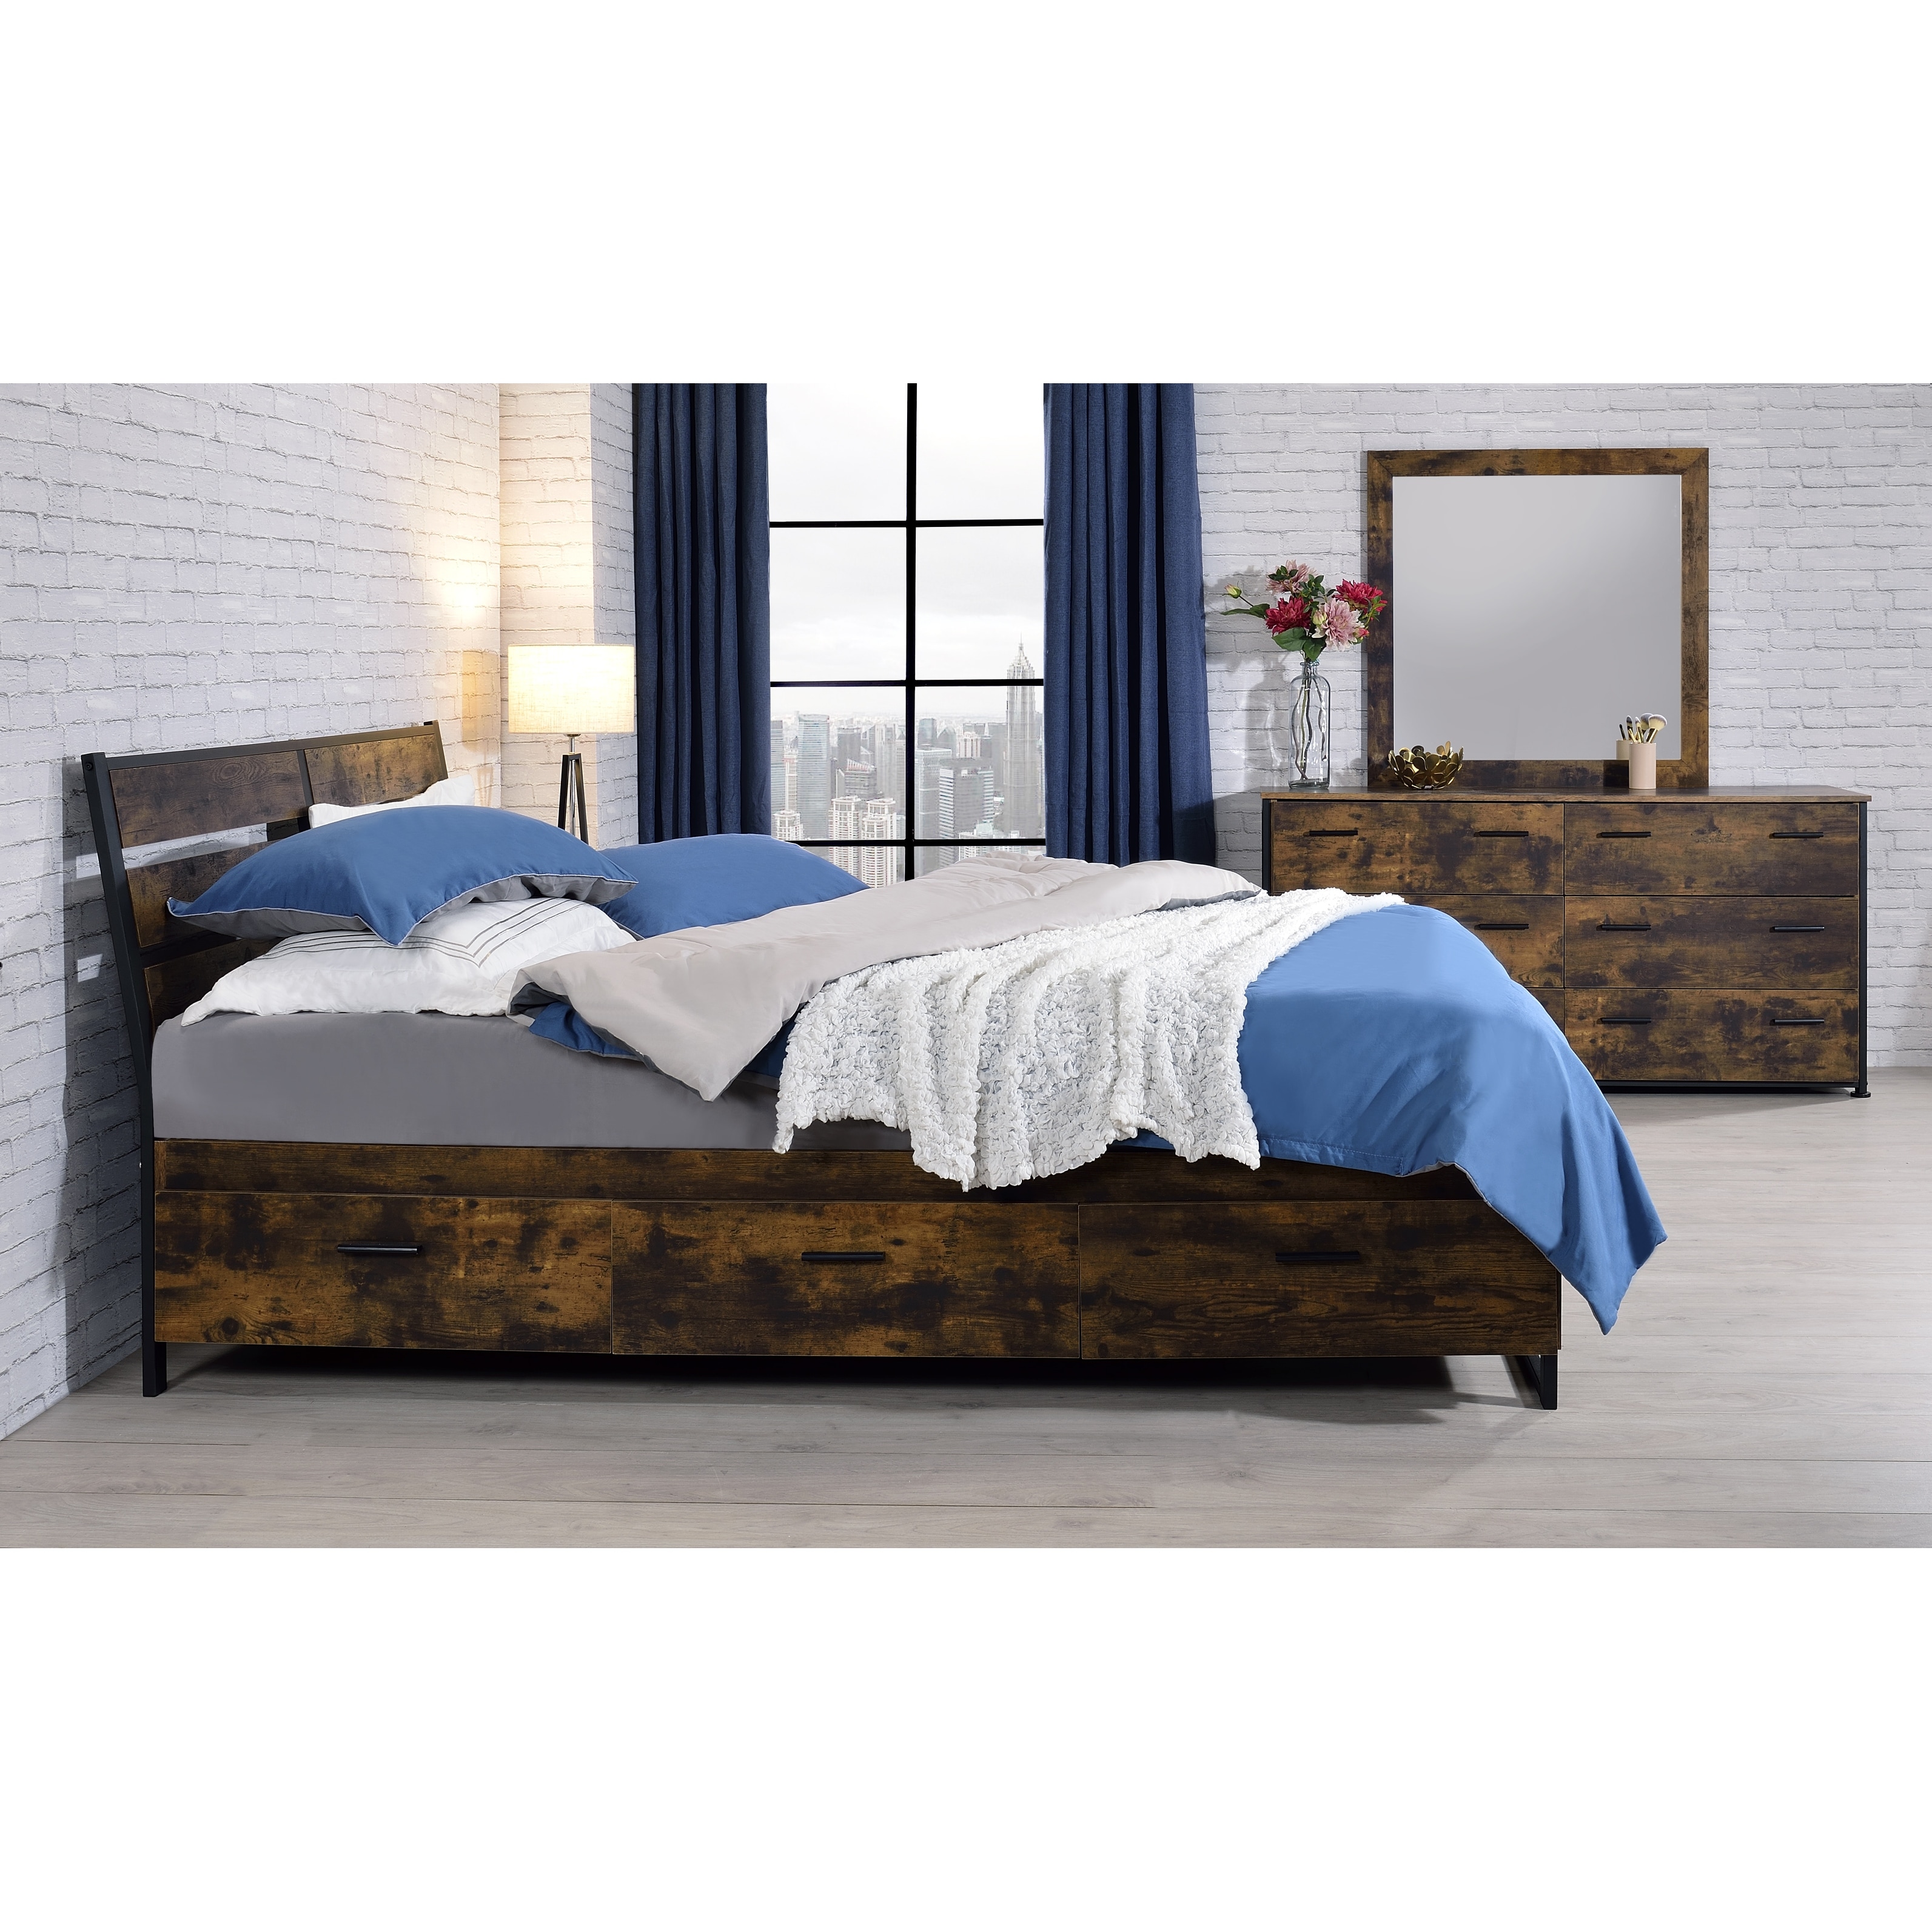 Juvanth Queen Bed with 6 Storage Drawers and Headboard in Rustic Oak & Black Finish -  Gerojo